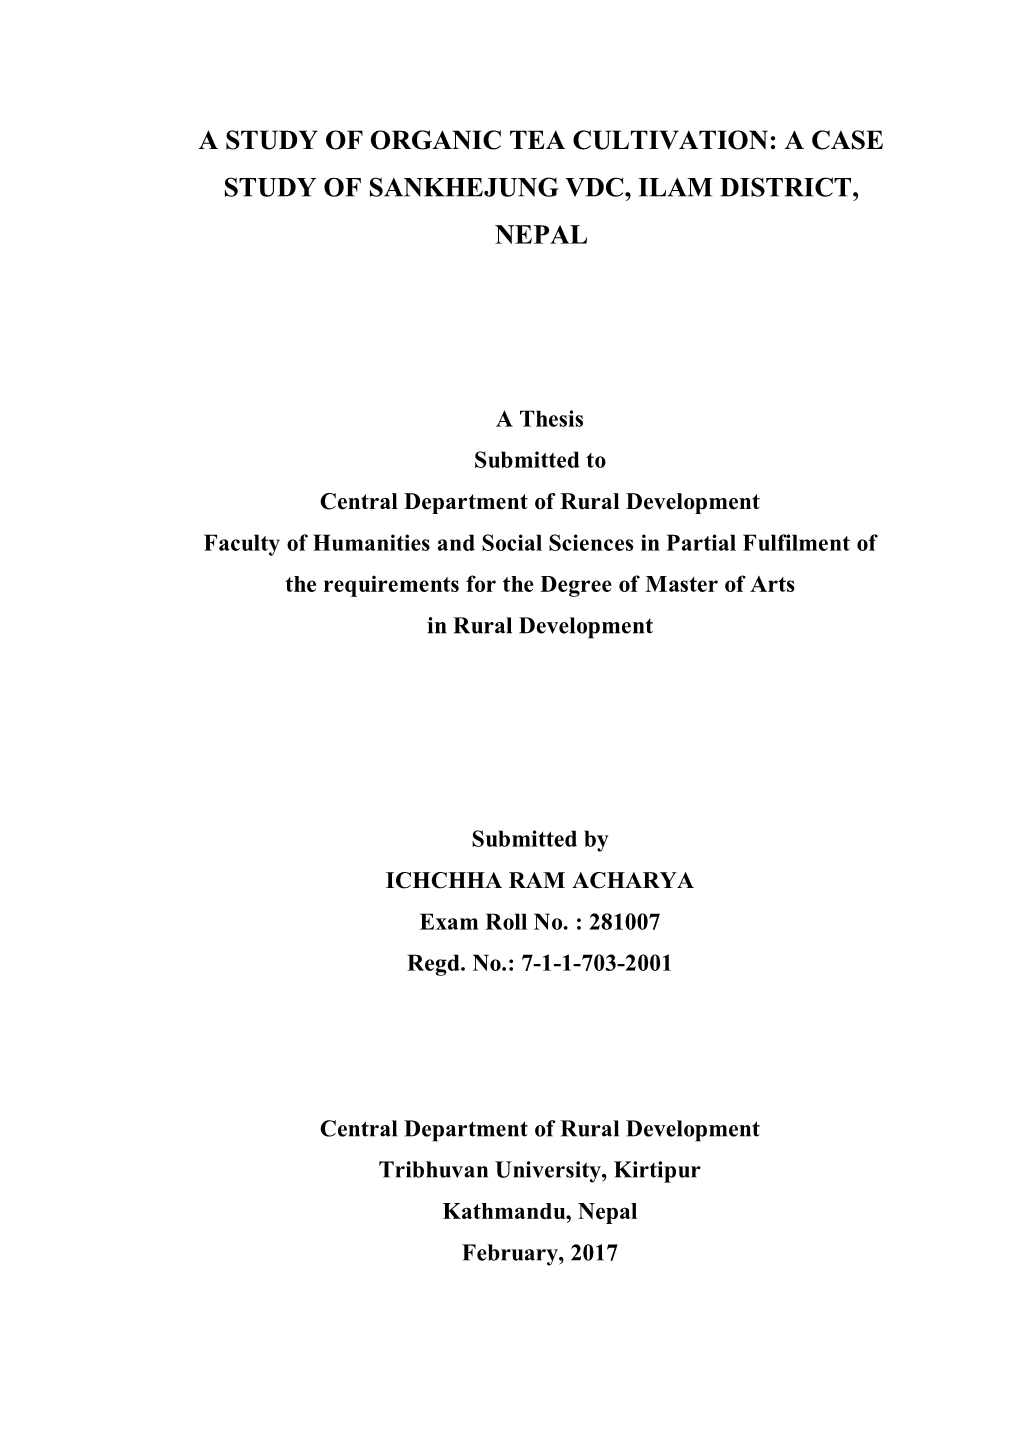 A Study of Organic Tea Cultivation: a Case Study of Sankhejung Vdc, Ilam District, Nepal